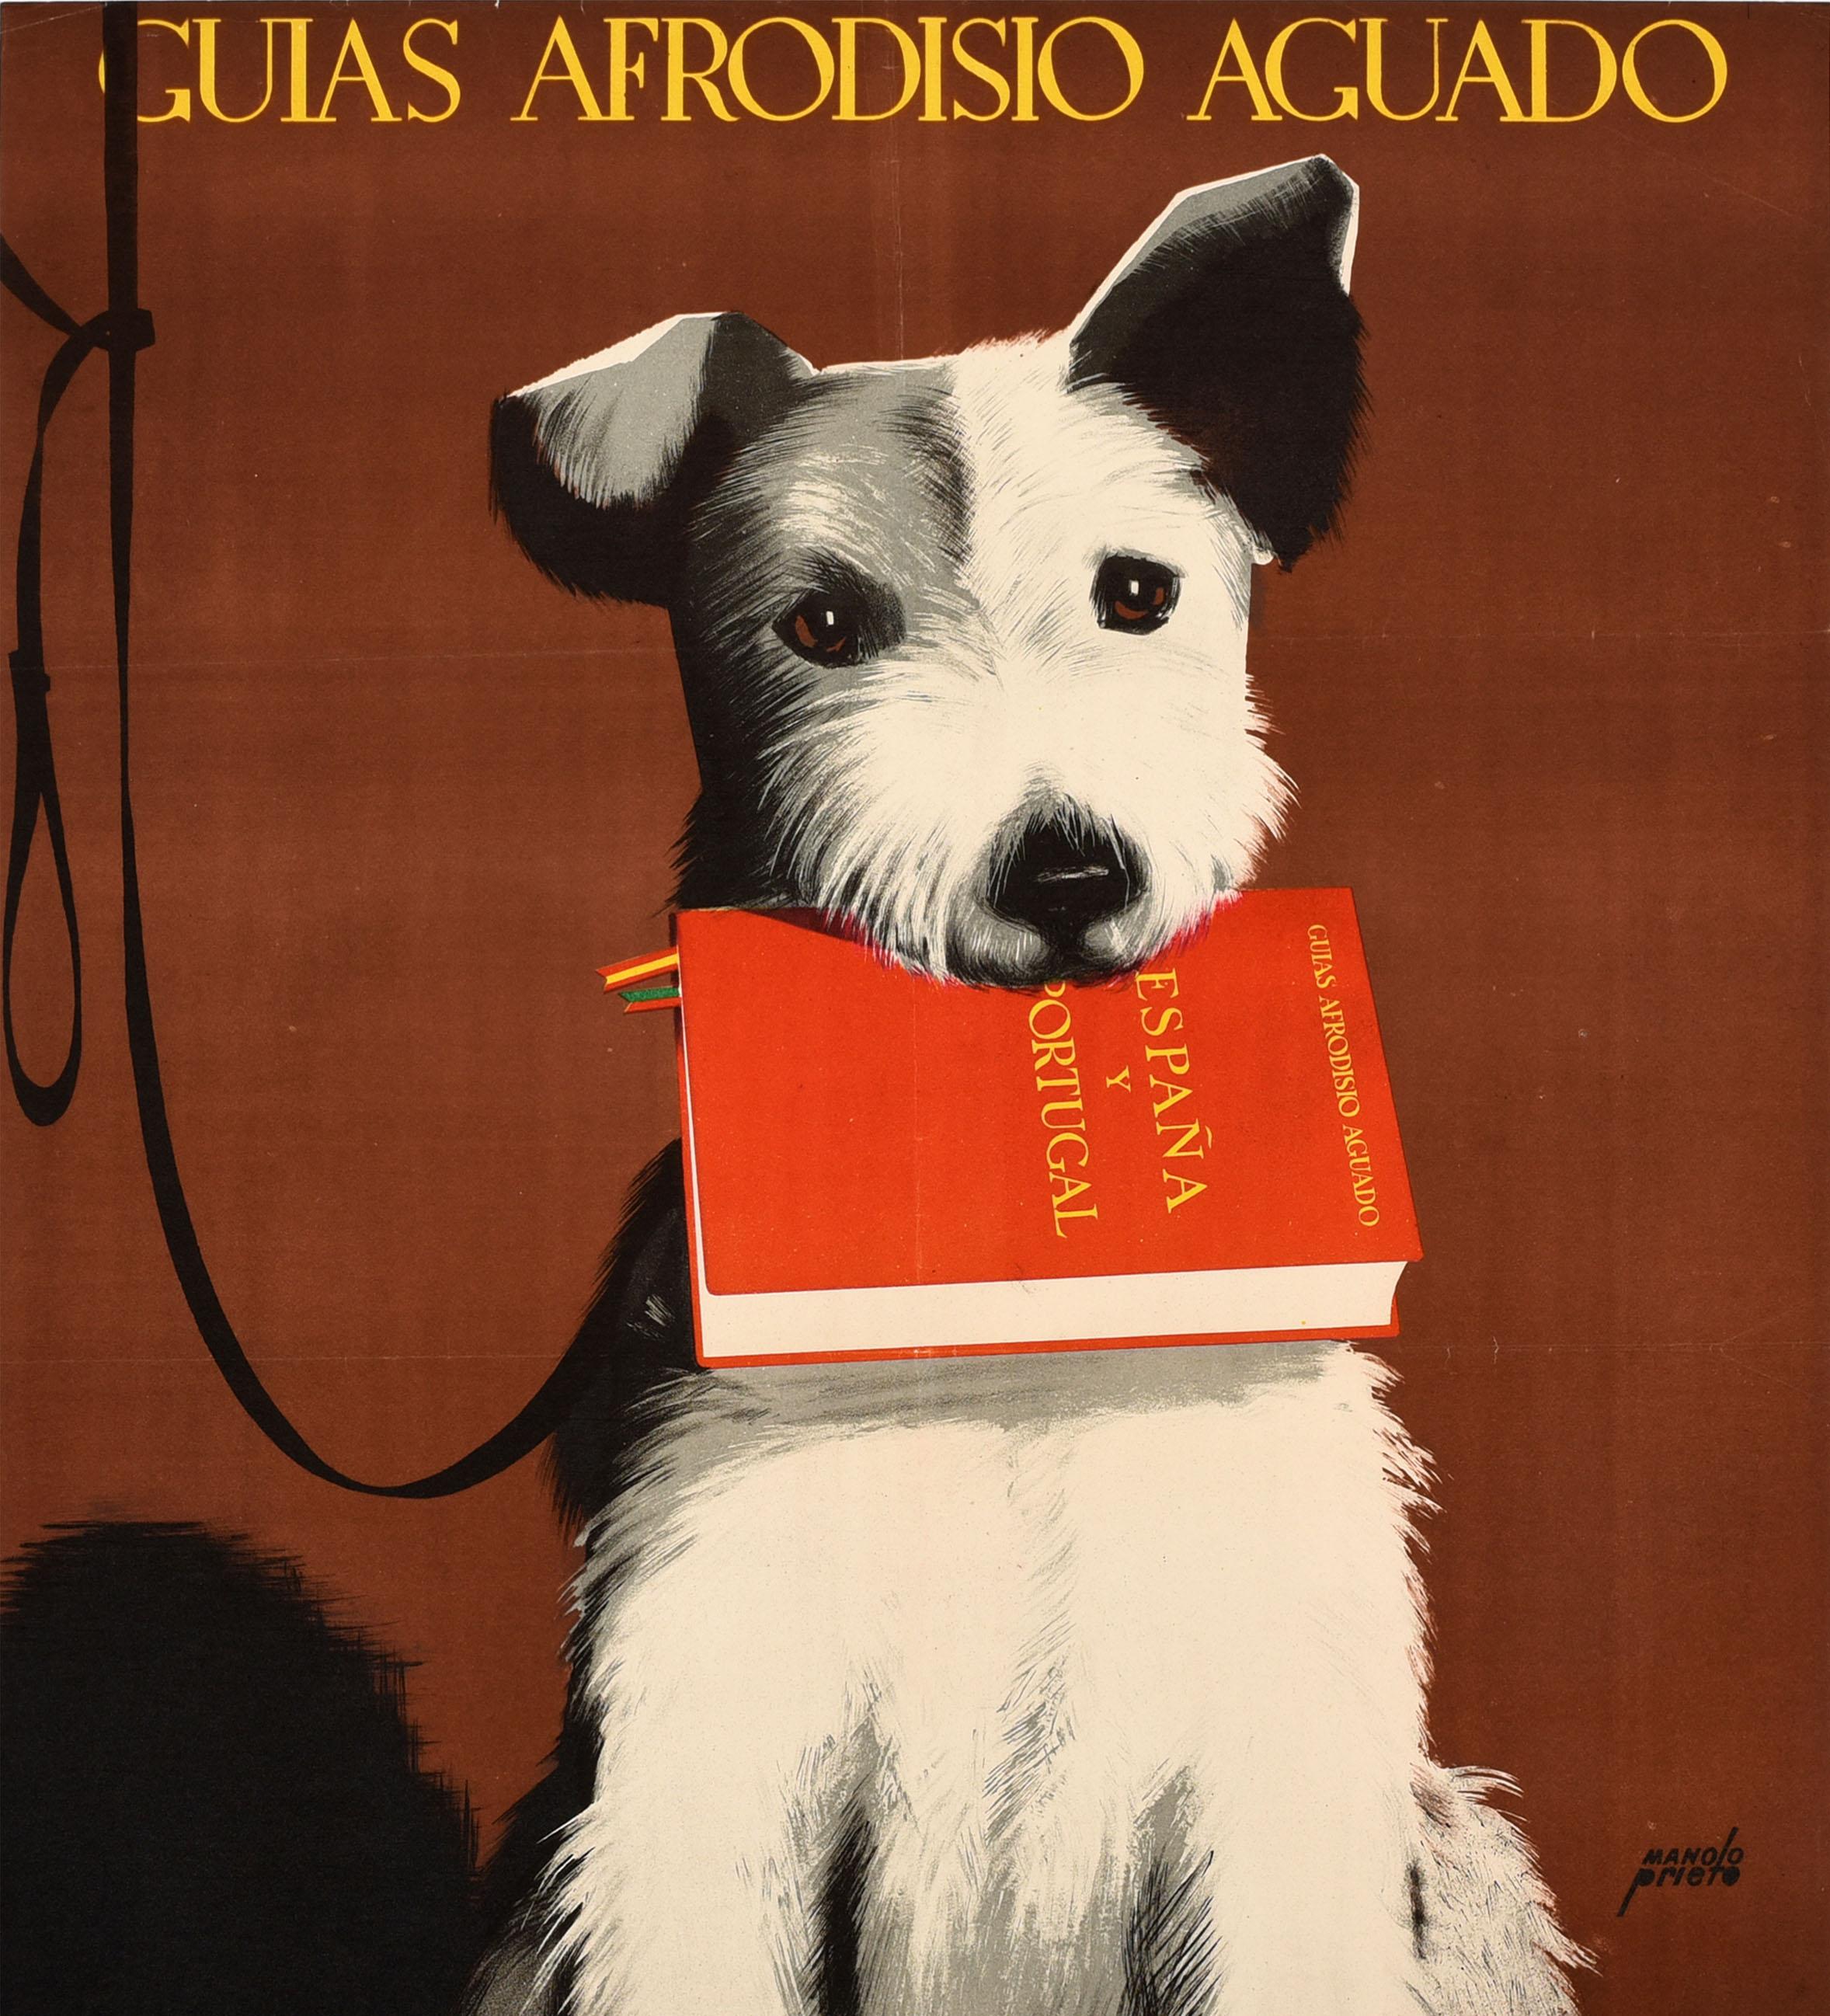 Original vintage book advertising poster - Guias Afrodisio Aguado Espana y Portugal / Spain and Portugal Guide Books - featuring great artwork by Manolo Prieto (1912-1991) depicting a black and white terrier dog on a lead holding the red book in its